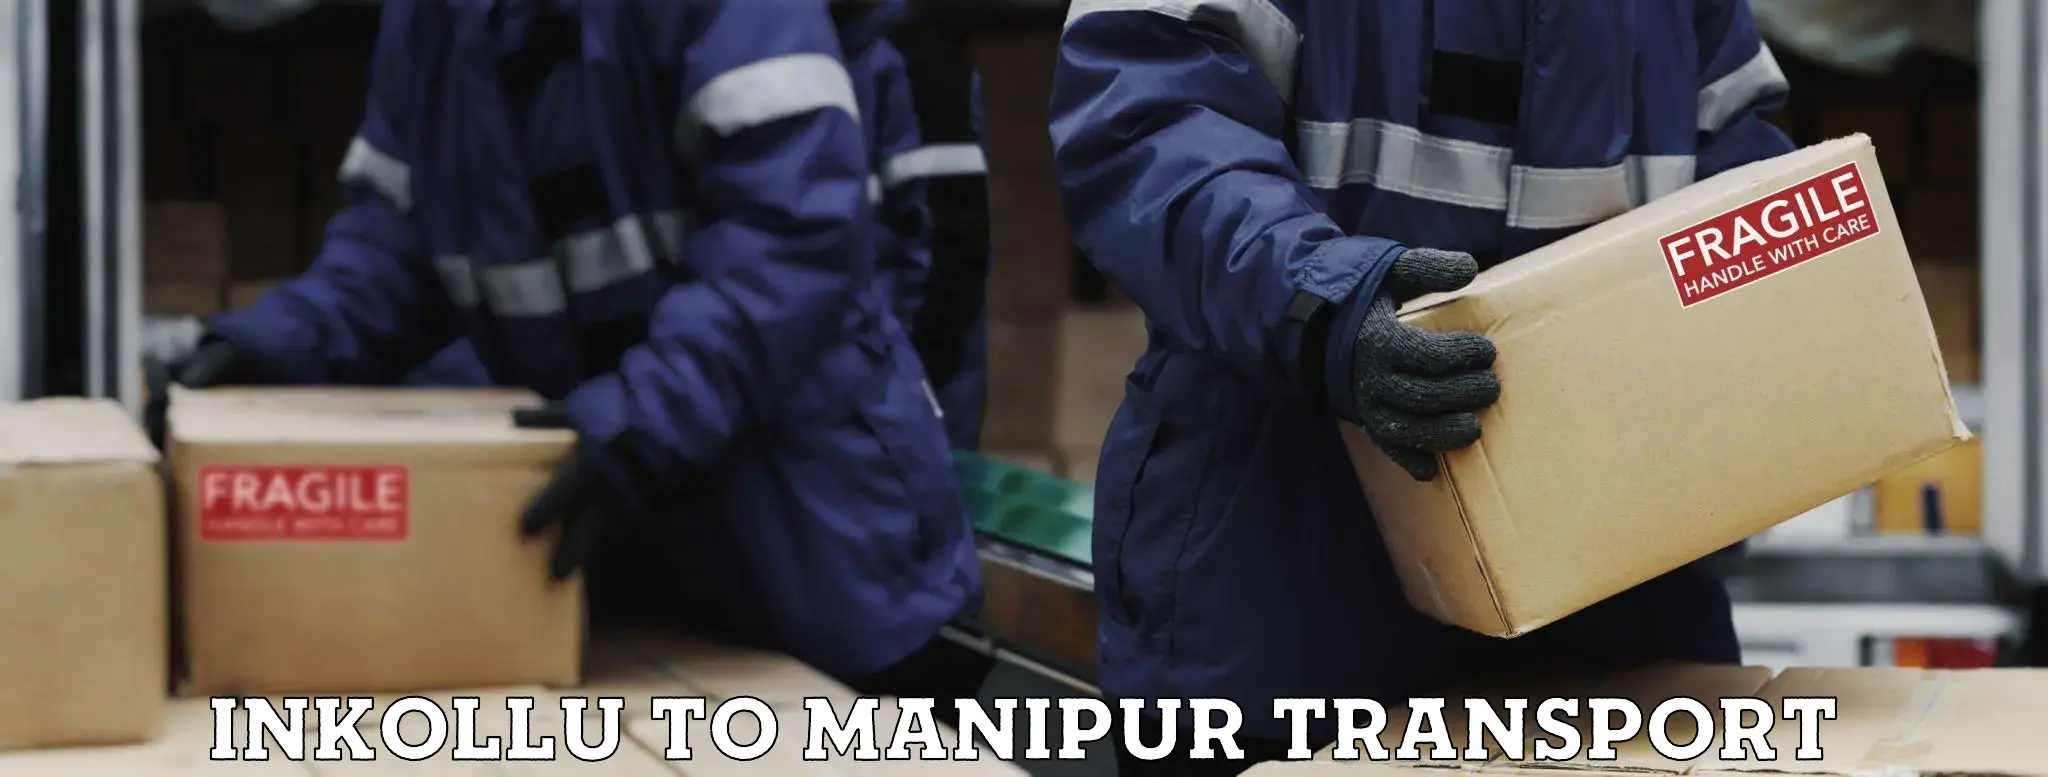 Container transport service Inkollu to Manipur